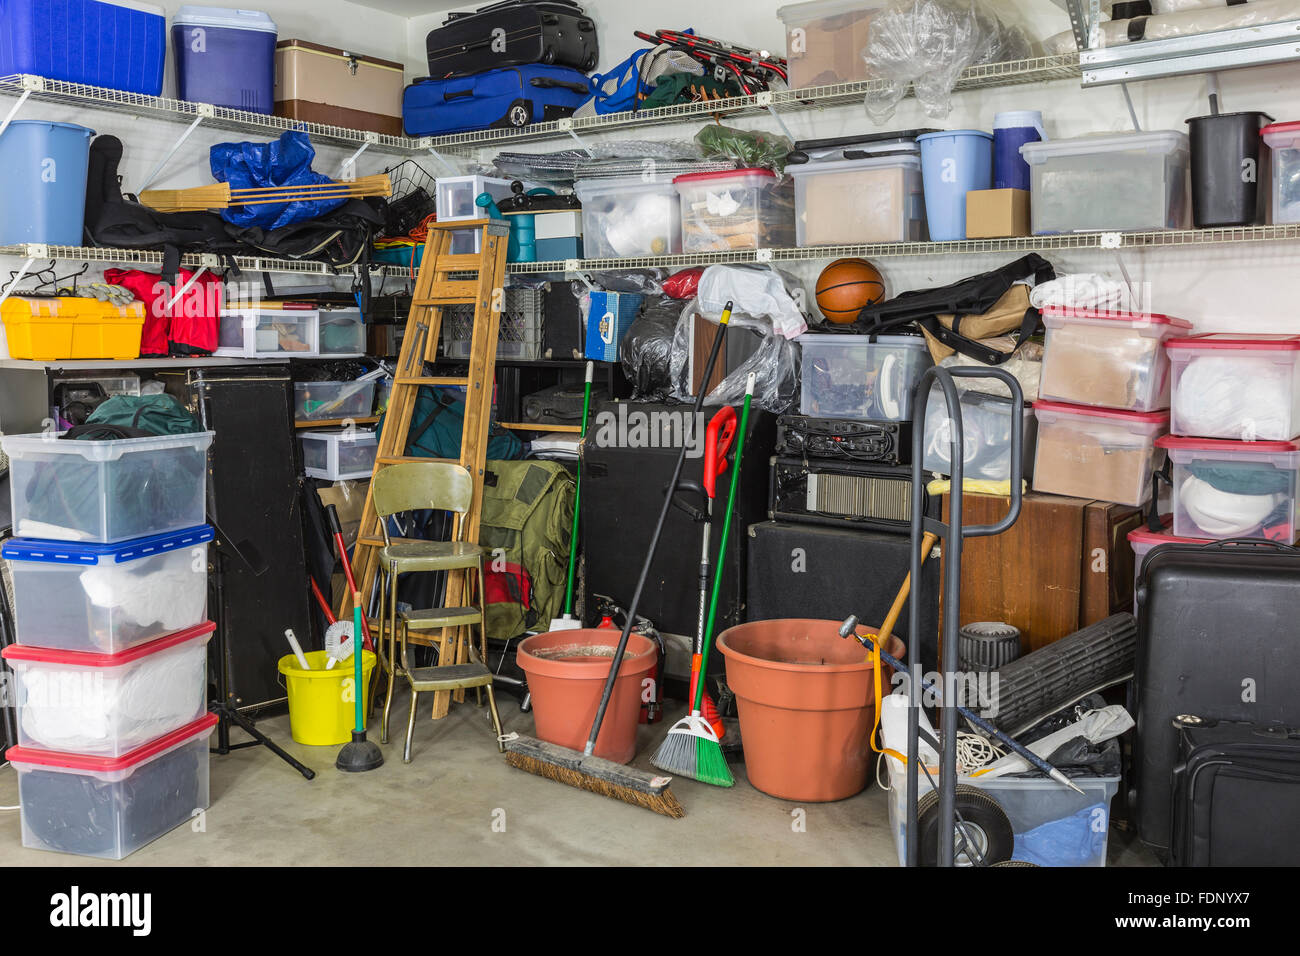 Residential garage full of junk and storage. Stock Photo